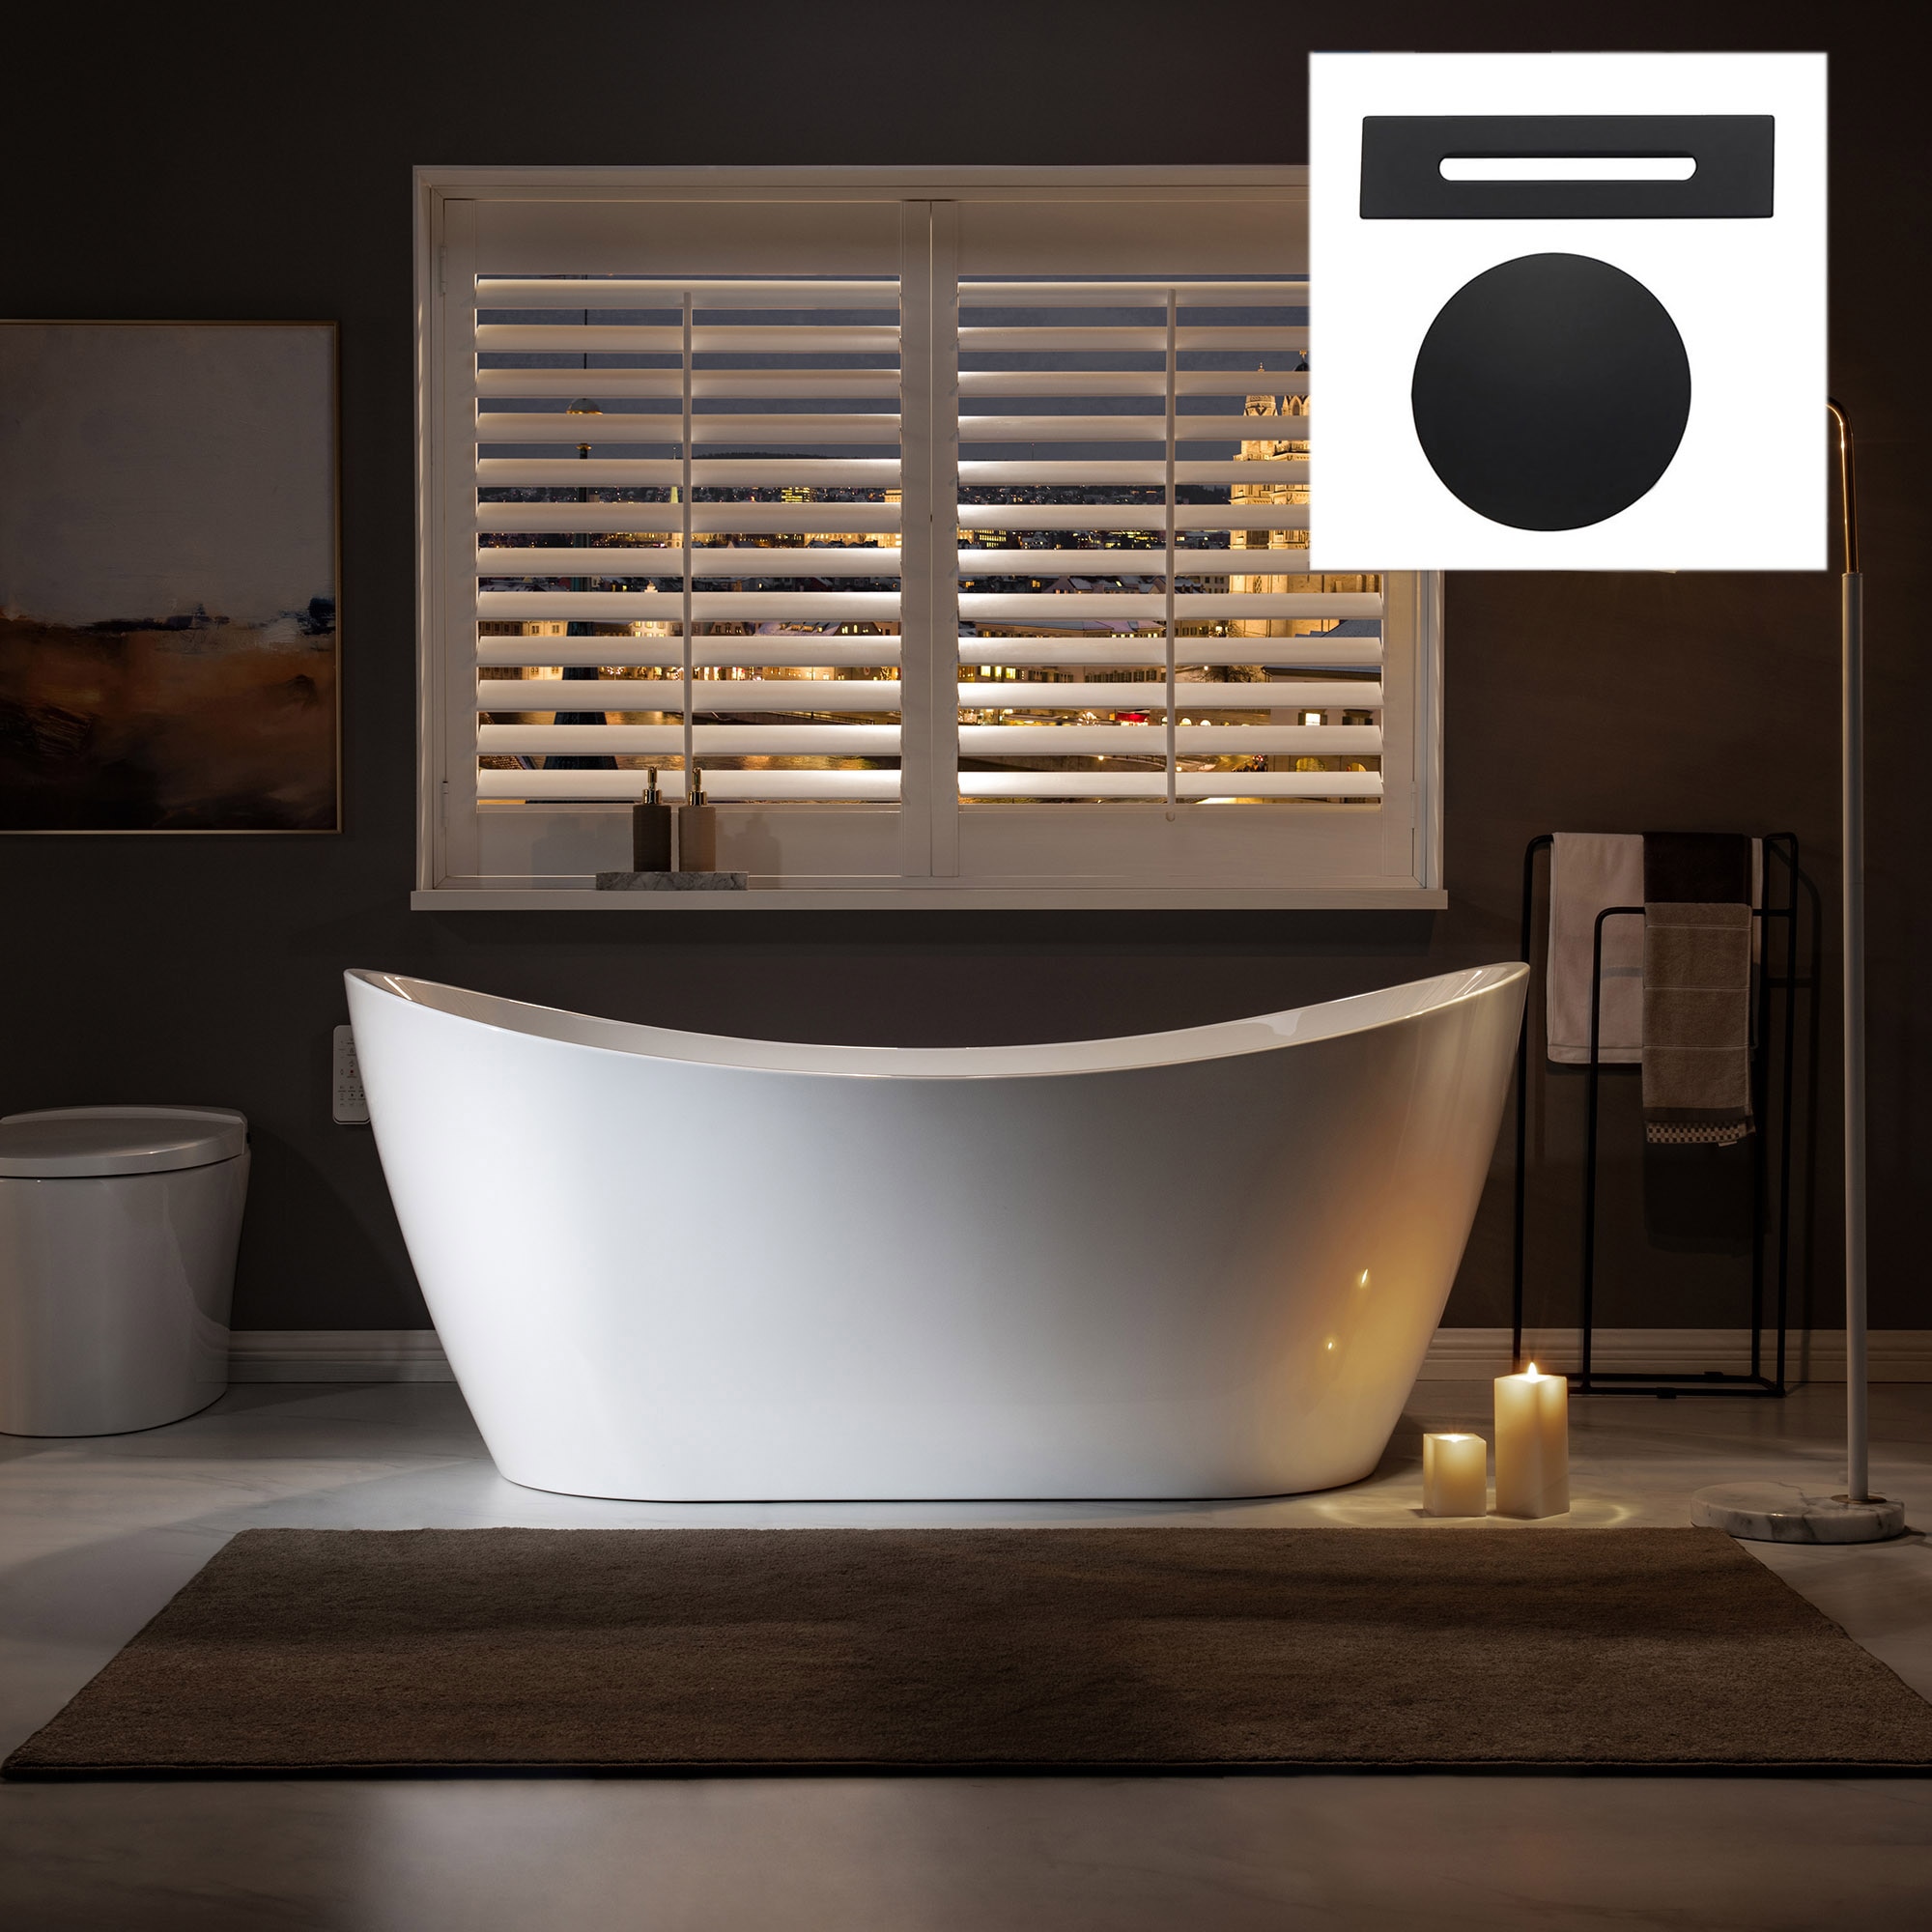 Detroit 31.5-in x 67-in White with Matte Black Trim Acrylic Oval Clawfoot Soaking Bathtub with Drain (Center Drain) Stainless Steel | - Woodbridge LB214